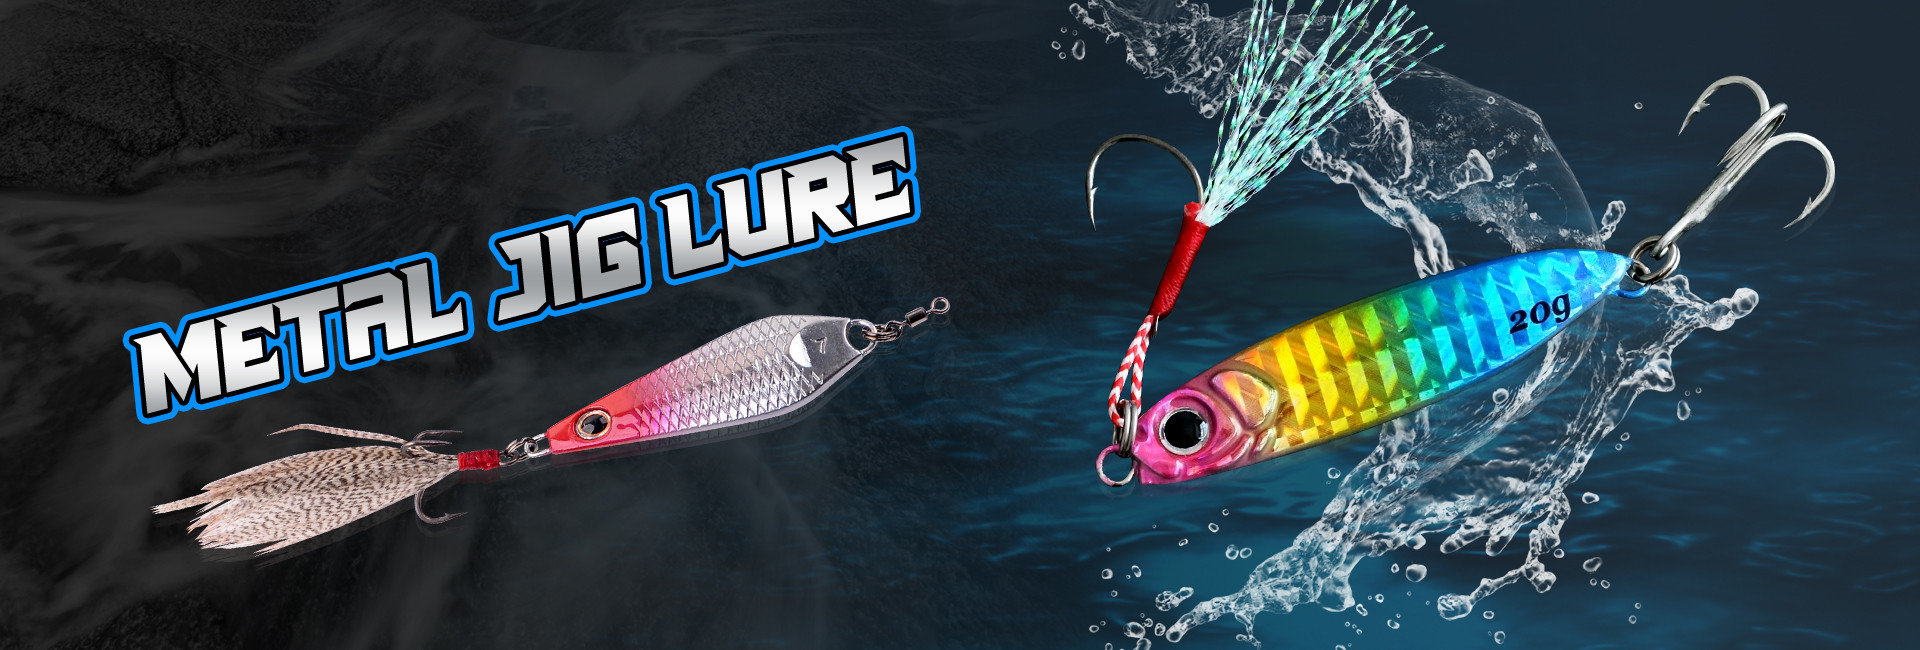 ILURE15 Artificial Silicone Fishing Lures Soft Bait Bionic Shrimp Bait  Larva Insect Worm Plastic For Bass Trout Pesca 8cm 1.5g - AliExpress